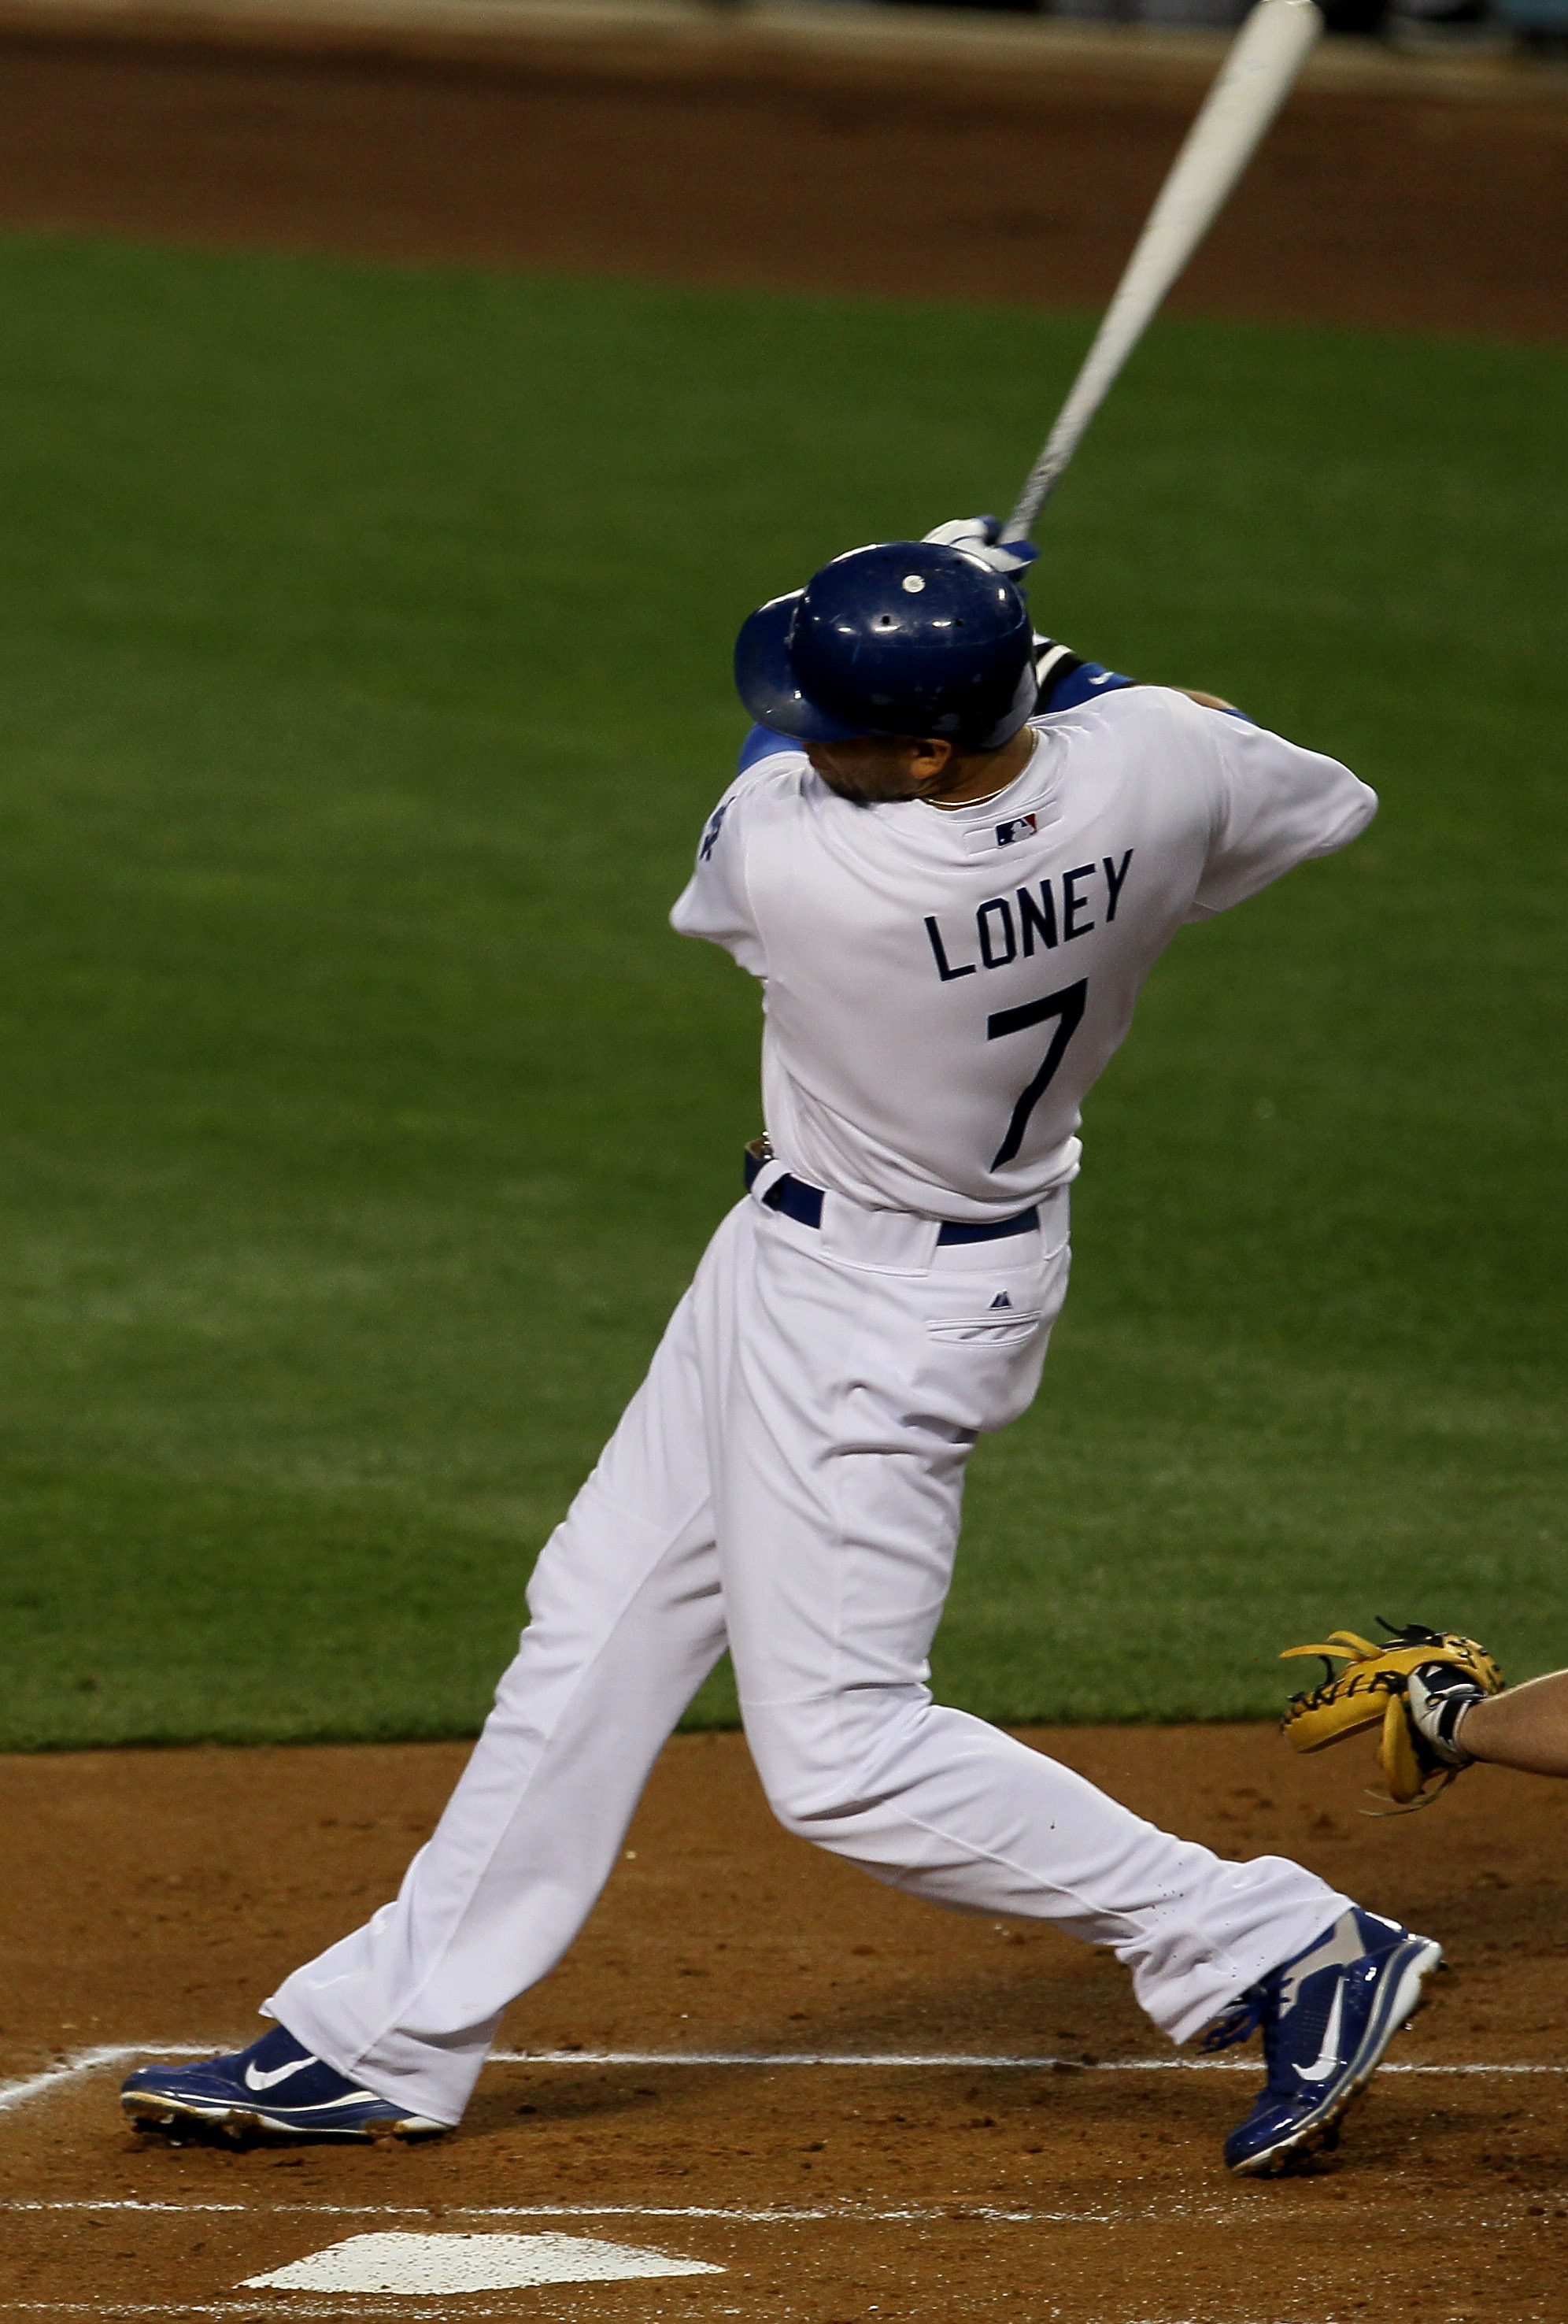 LOS ANGELES - APRIL 18:  James Loney #7 of the Los Angeles Dodgers hits a two RBI single in the first inning against the Atlanta Braves on April 18, 2011 at Dodger Stadium in Los Angeles, California.   (Photo by Stephen Dunn/Getty Images)